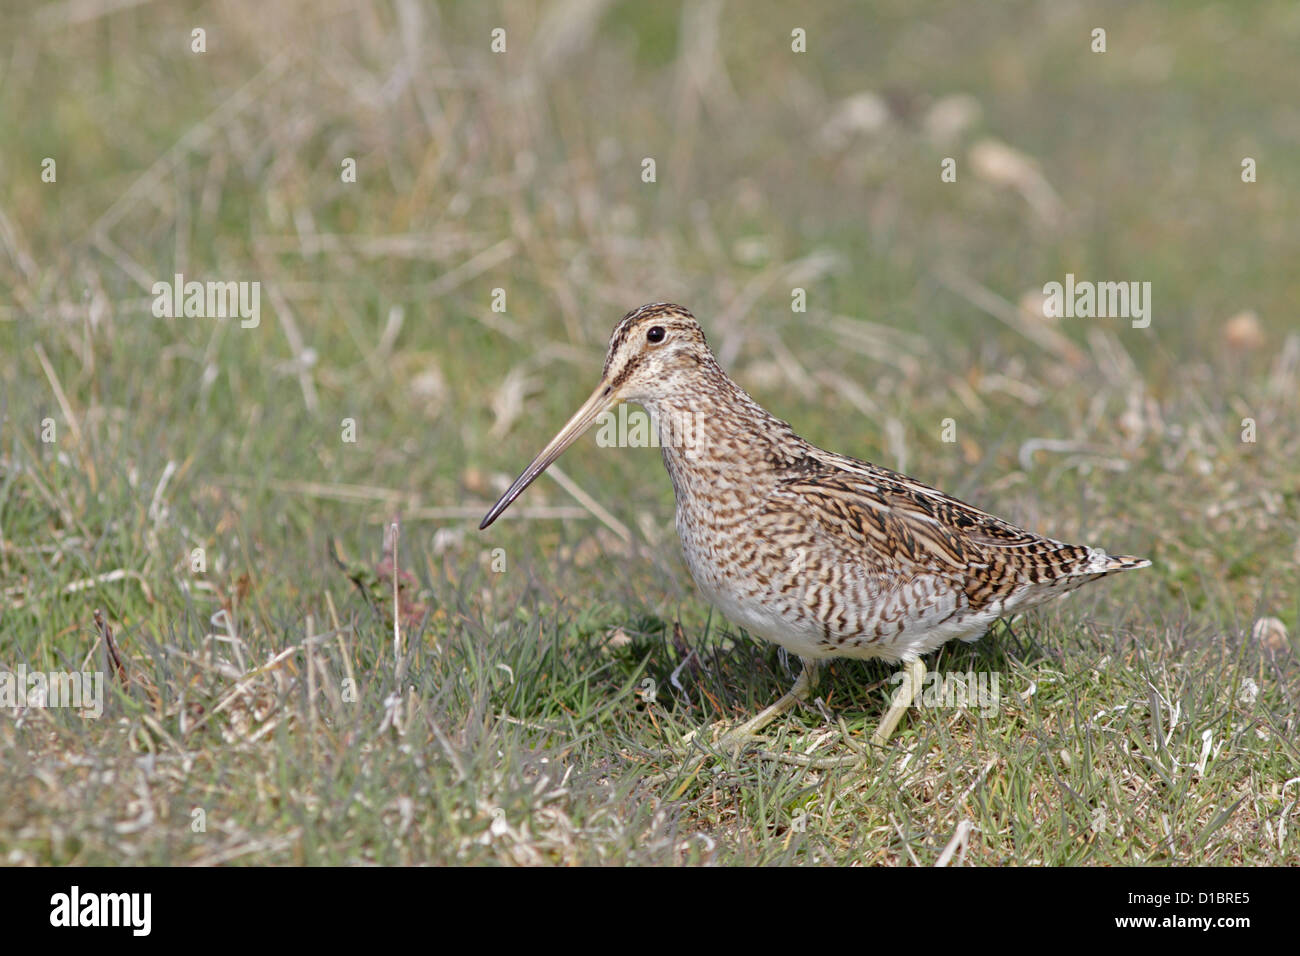 South American or Magellanic Snipe Stock Photo